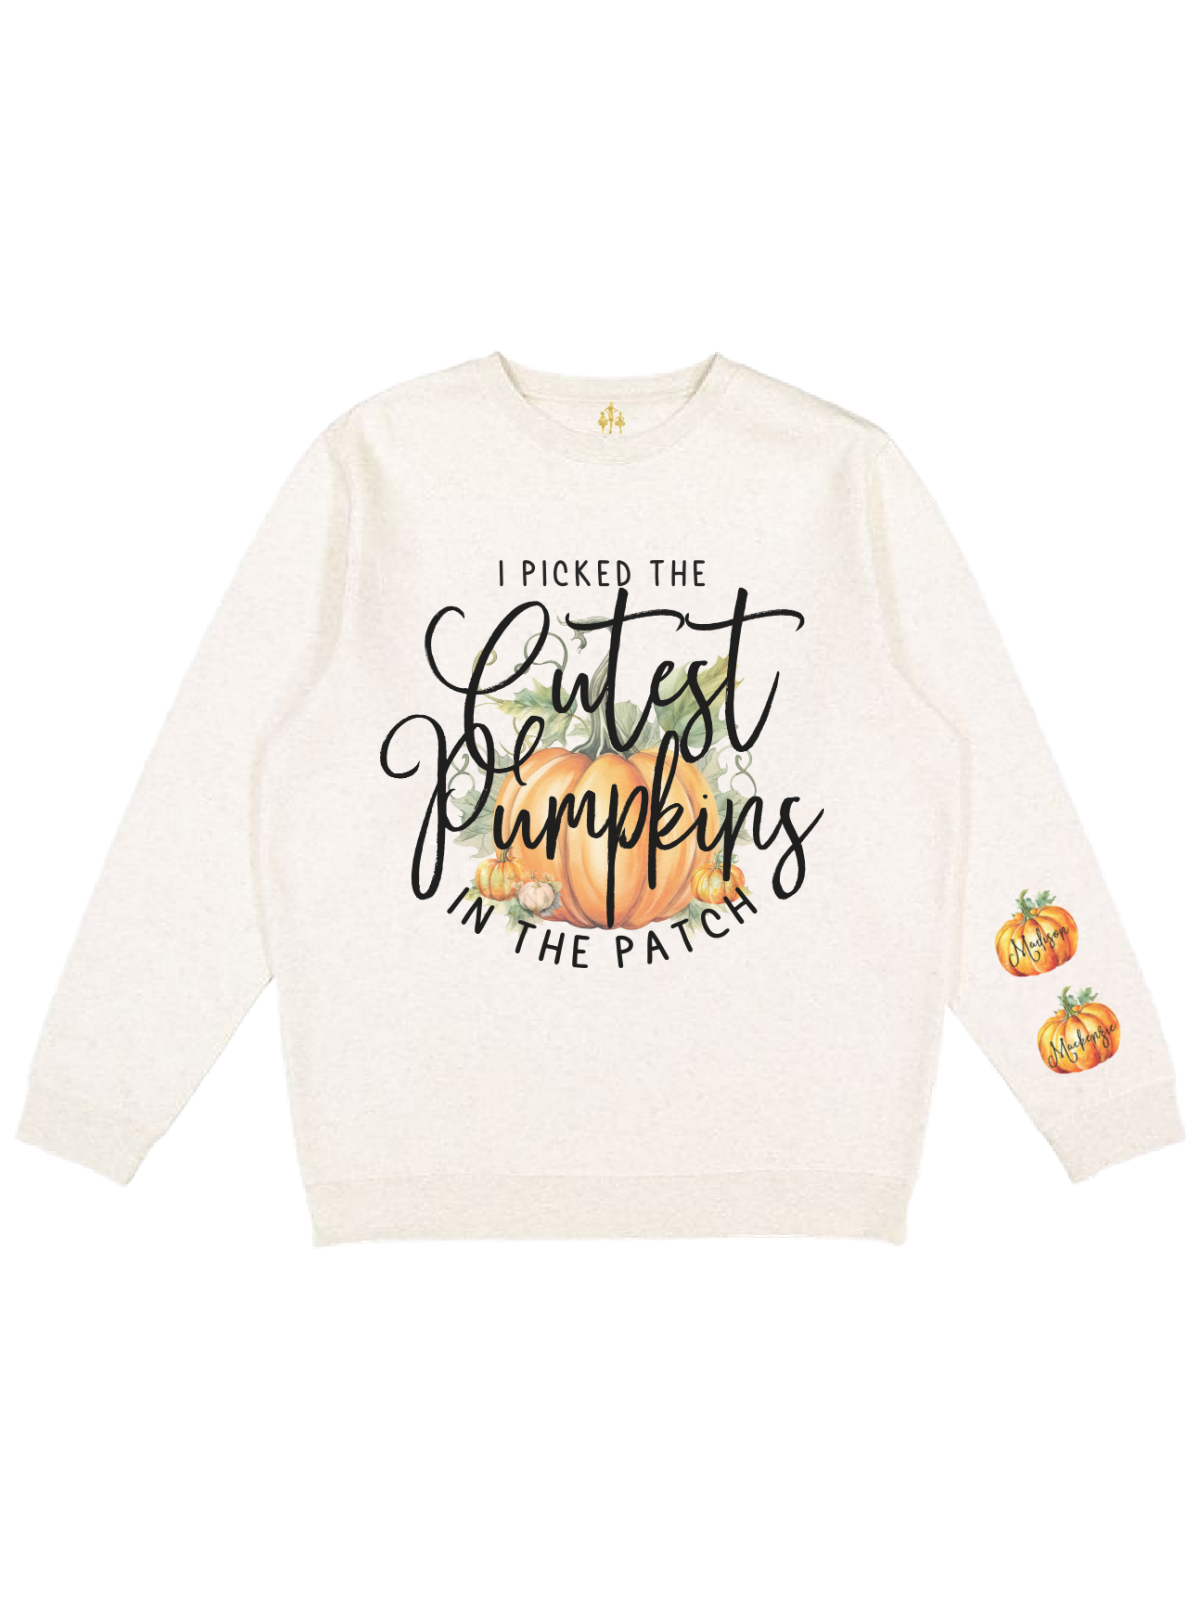 I Picked the Cutest Pumpkins in the Patch Adult Sweatshirt in Natural Heather